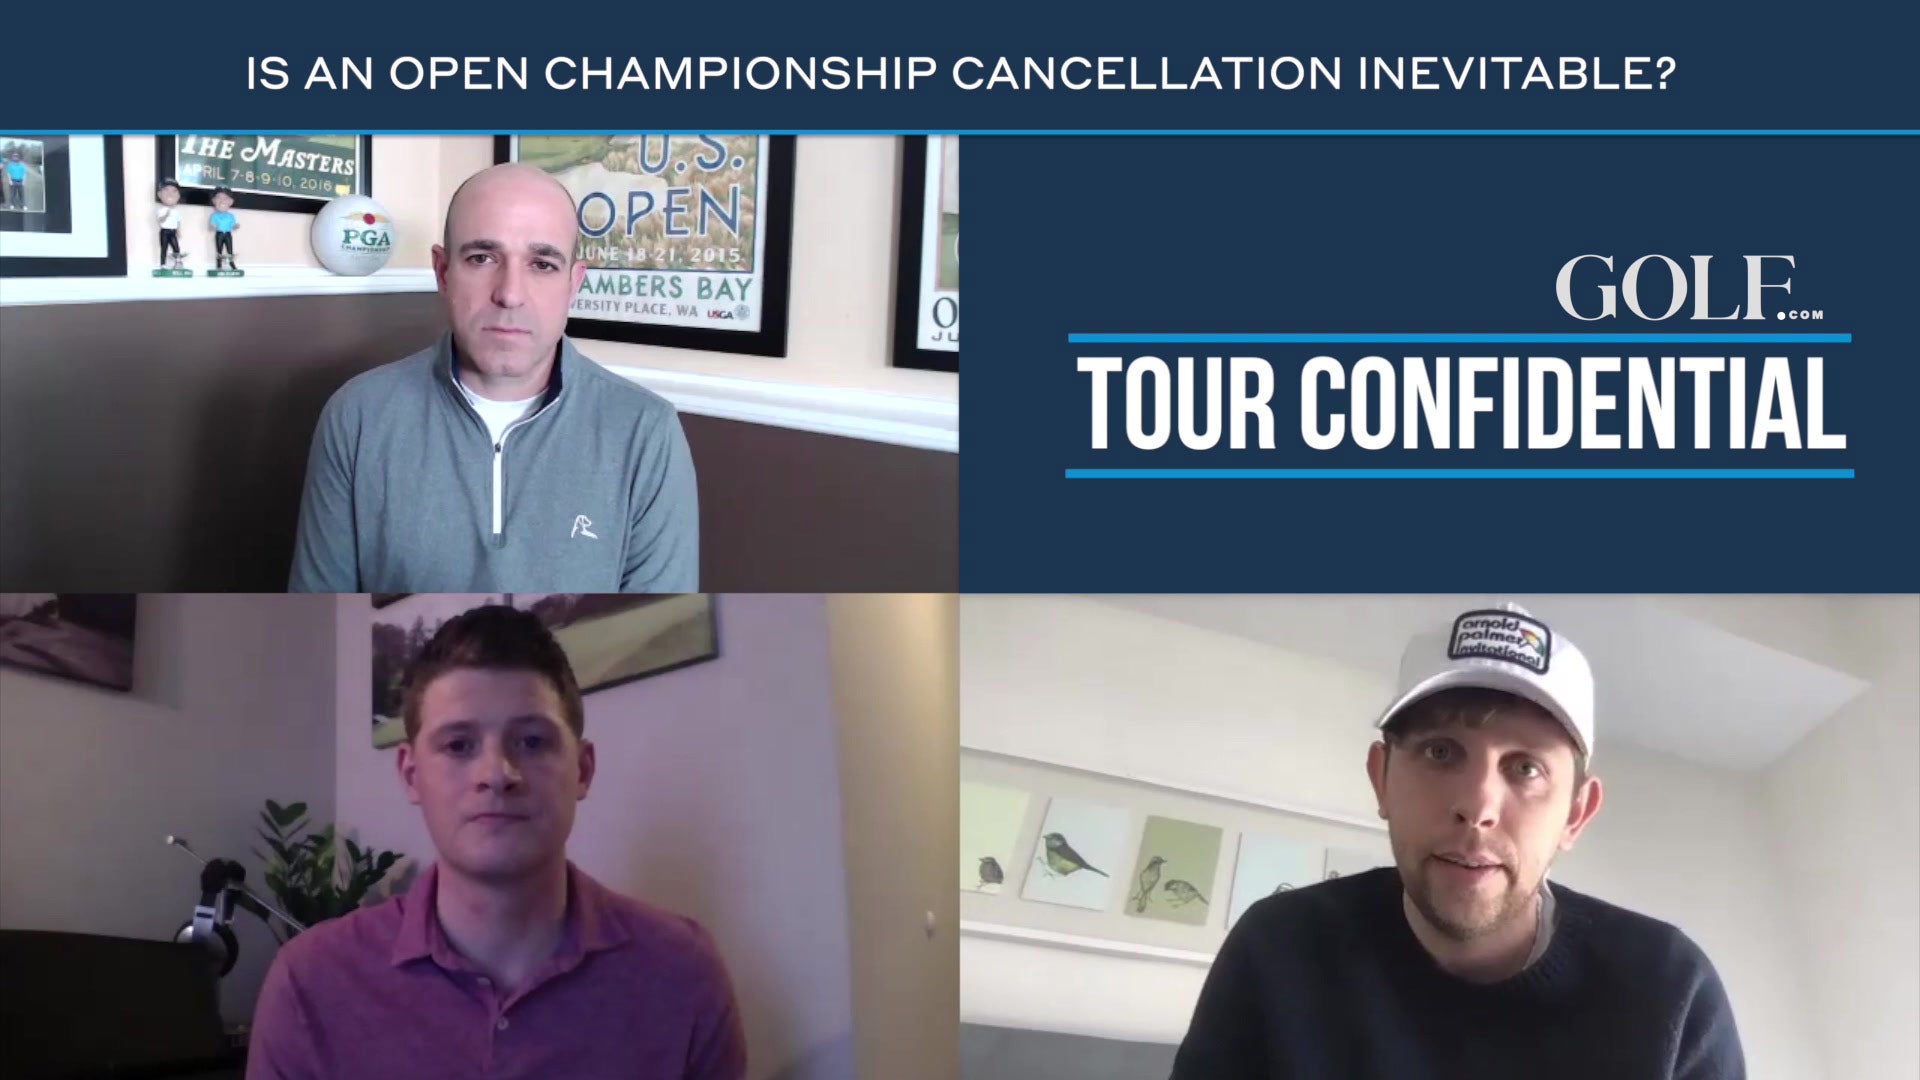 Tour Confidential Is an Open Championship cancellation inevitable?